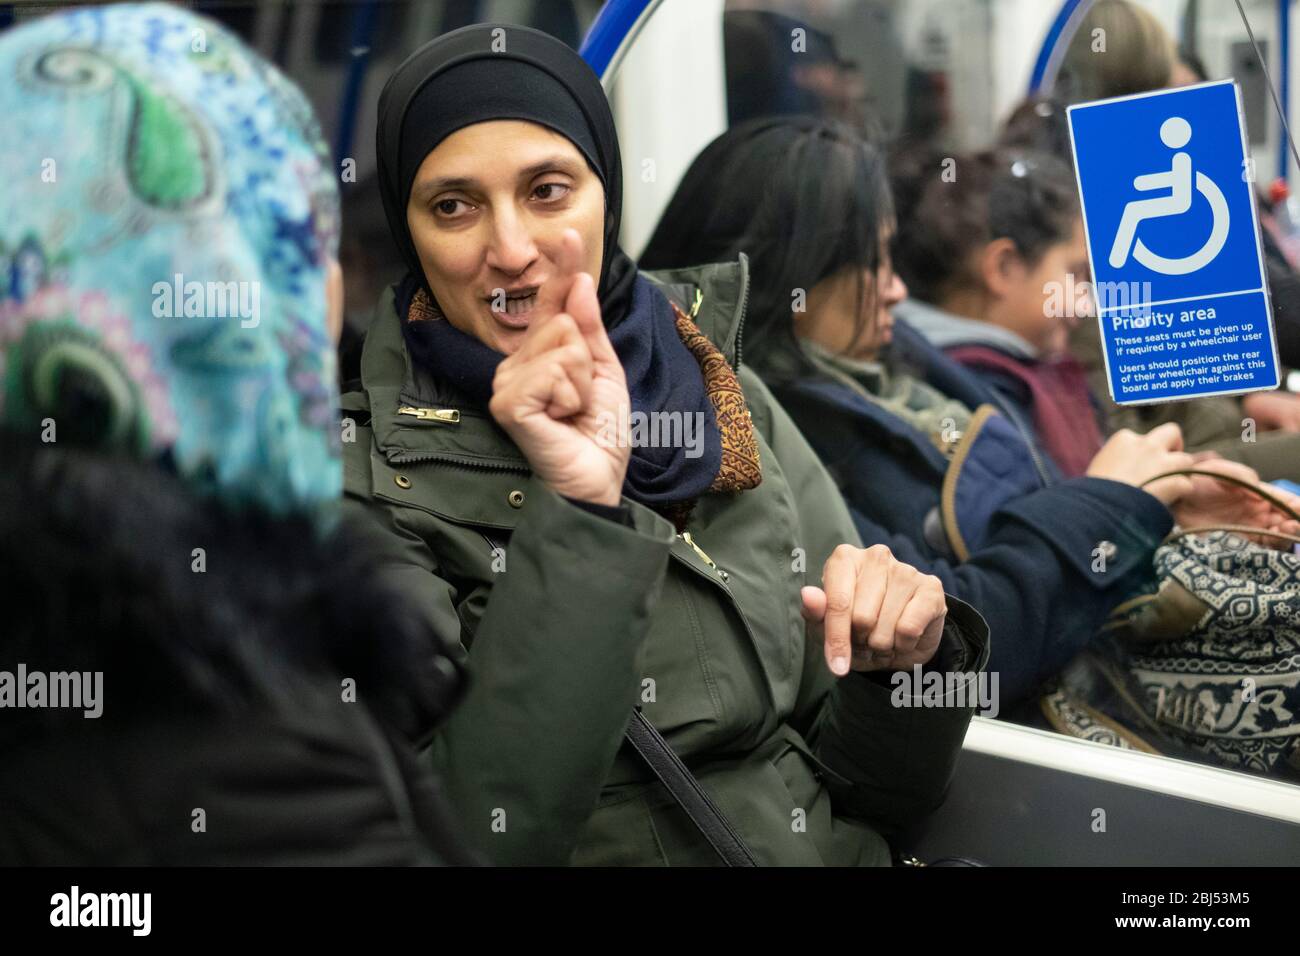 A woman wearing a headscarf and gesturing with her hands on the London Underground, England Stock Photo